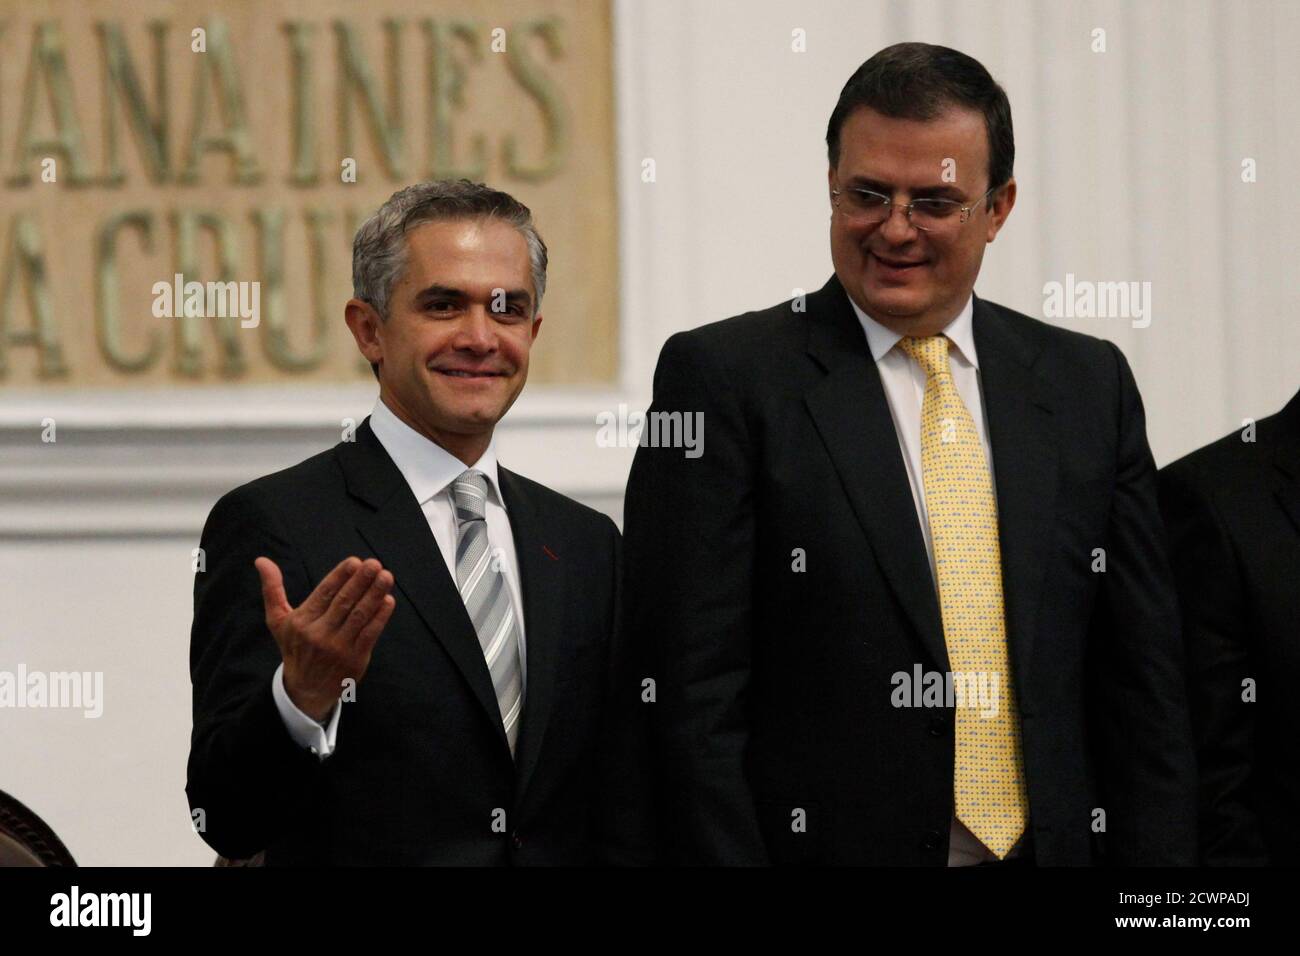 Mexico's new head of the Federal District Miguel Mancera (L) gestures as his outgoing counterpart Marcelo Ebrad looks on, during an oath taking ceremony inside the Legislative Assembly of the Federal District building in Mexico City December 5, 2012. REUTERS/Edgard Garrido (MEXICO - Tags: POLITICS) Stock Photo